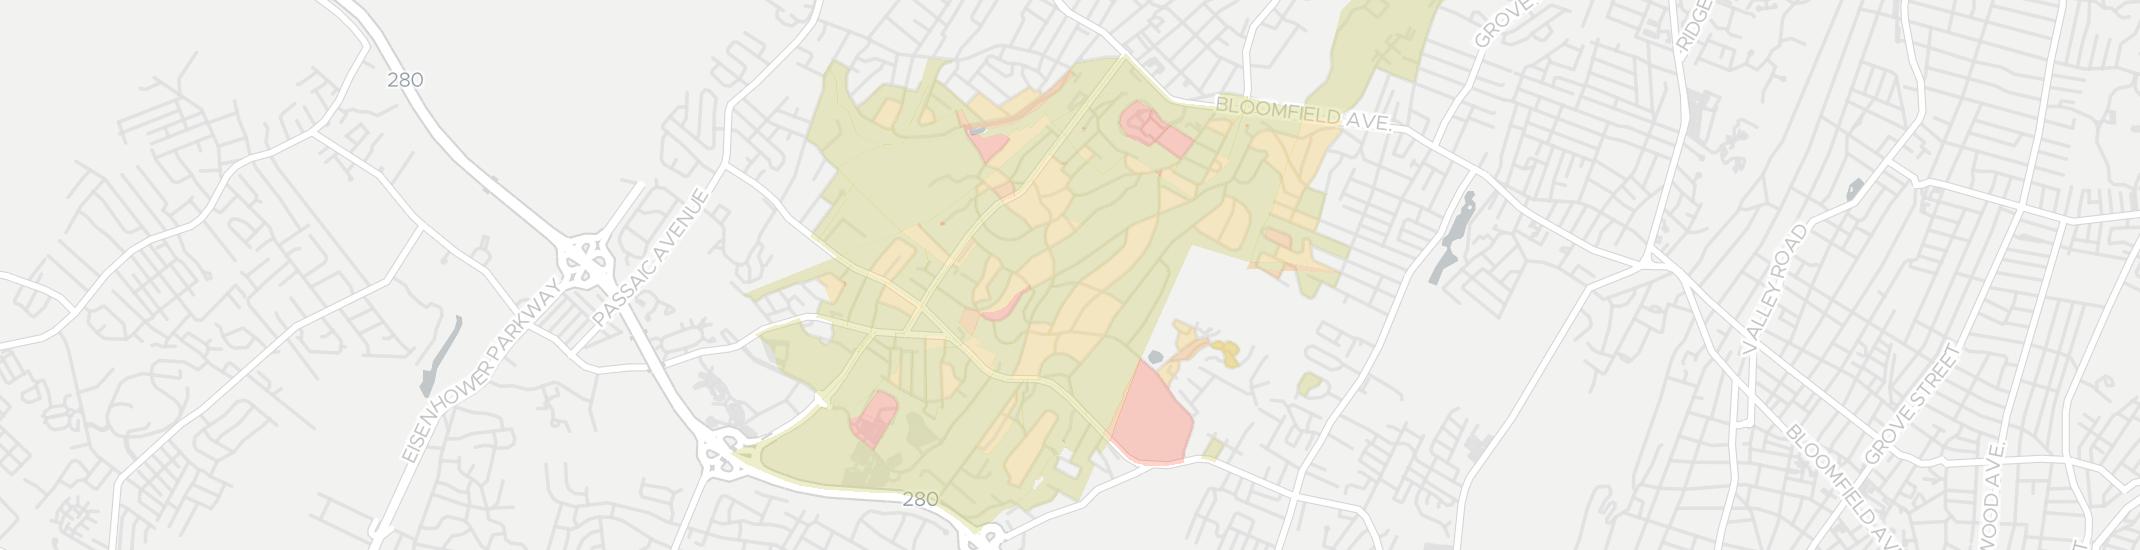 Essex Fells Internet Competition Map. Click for interactive map.